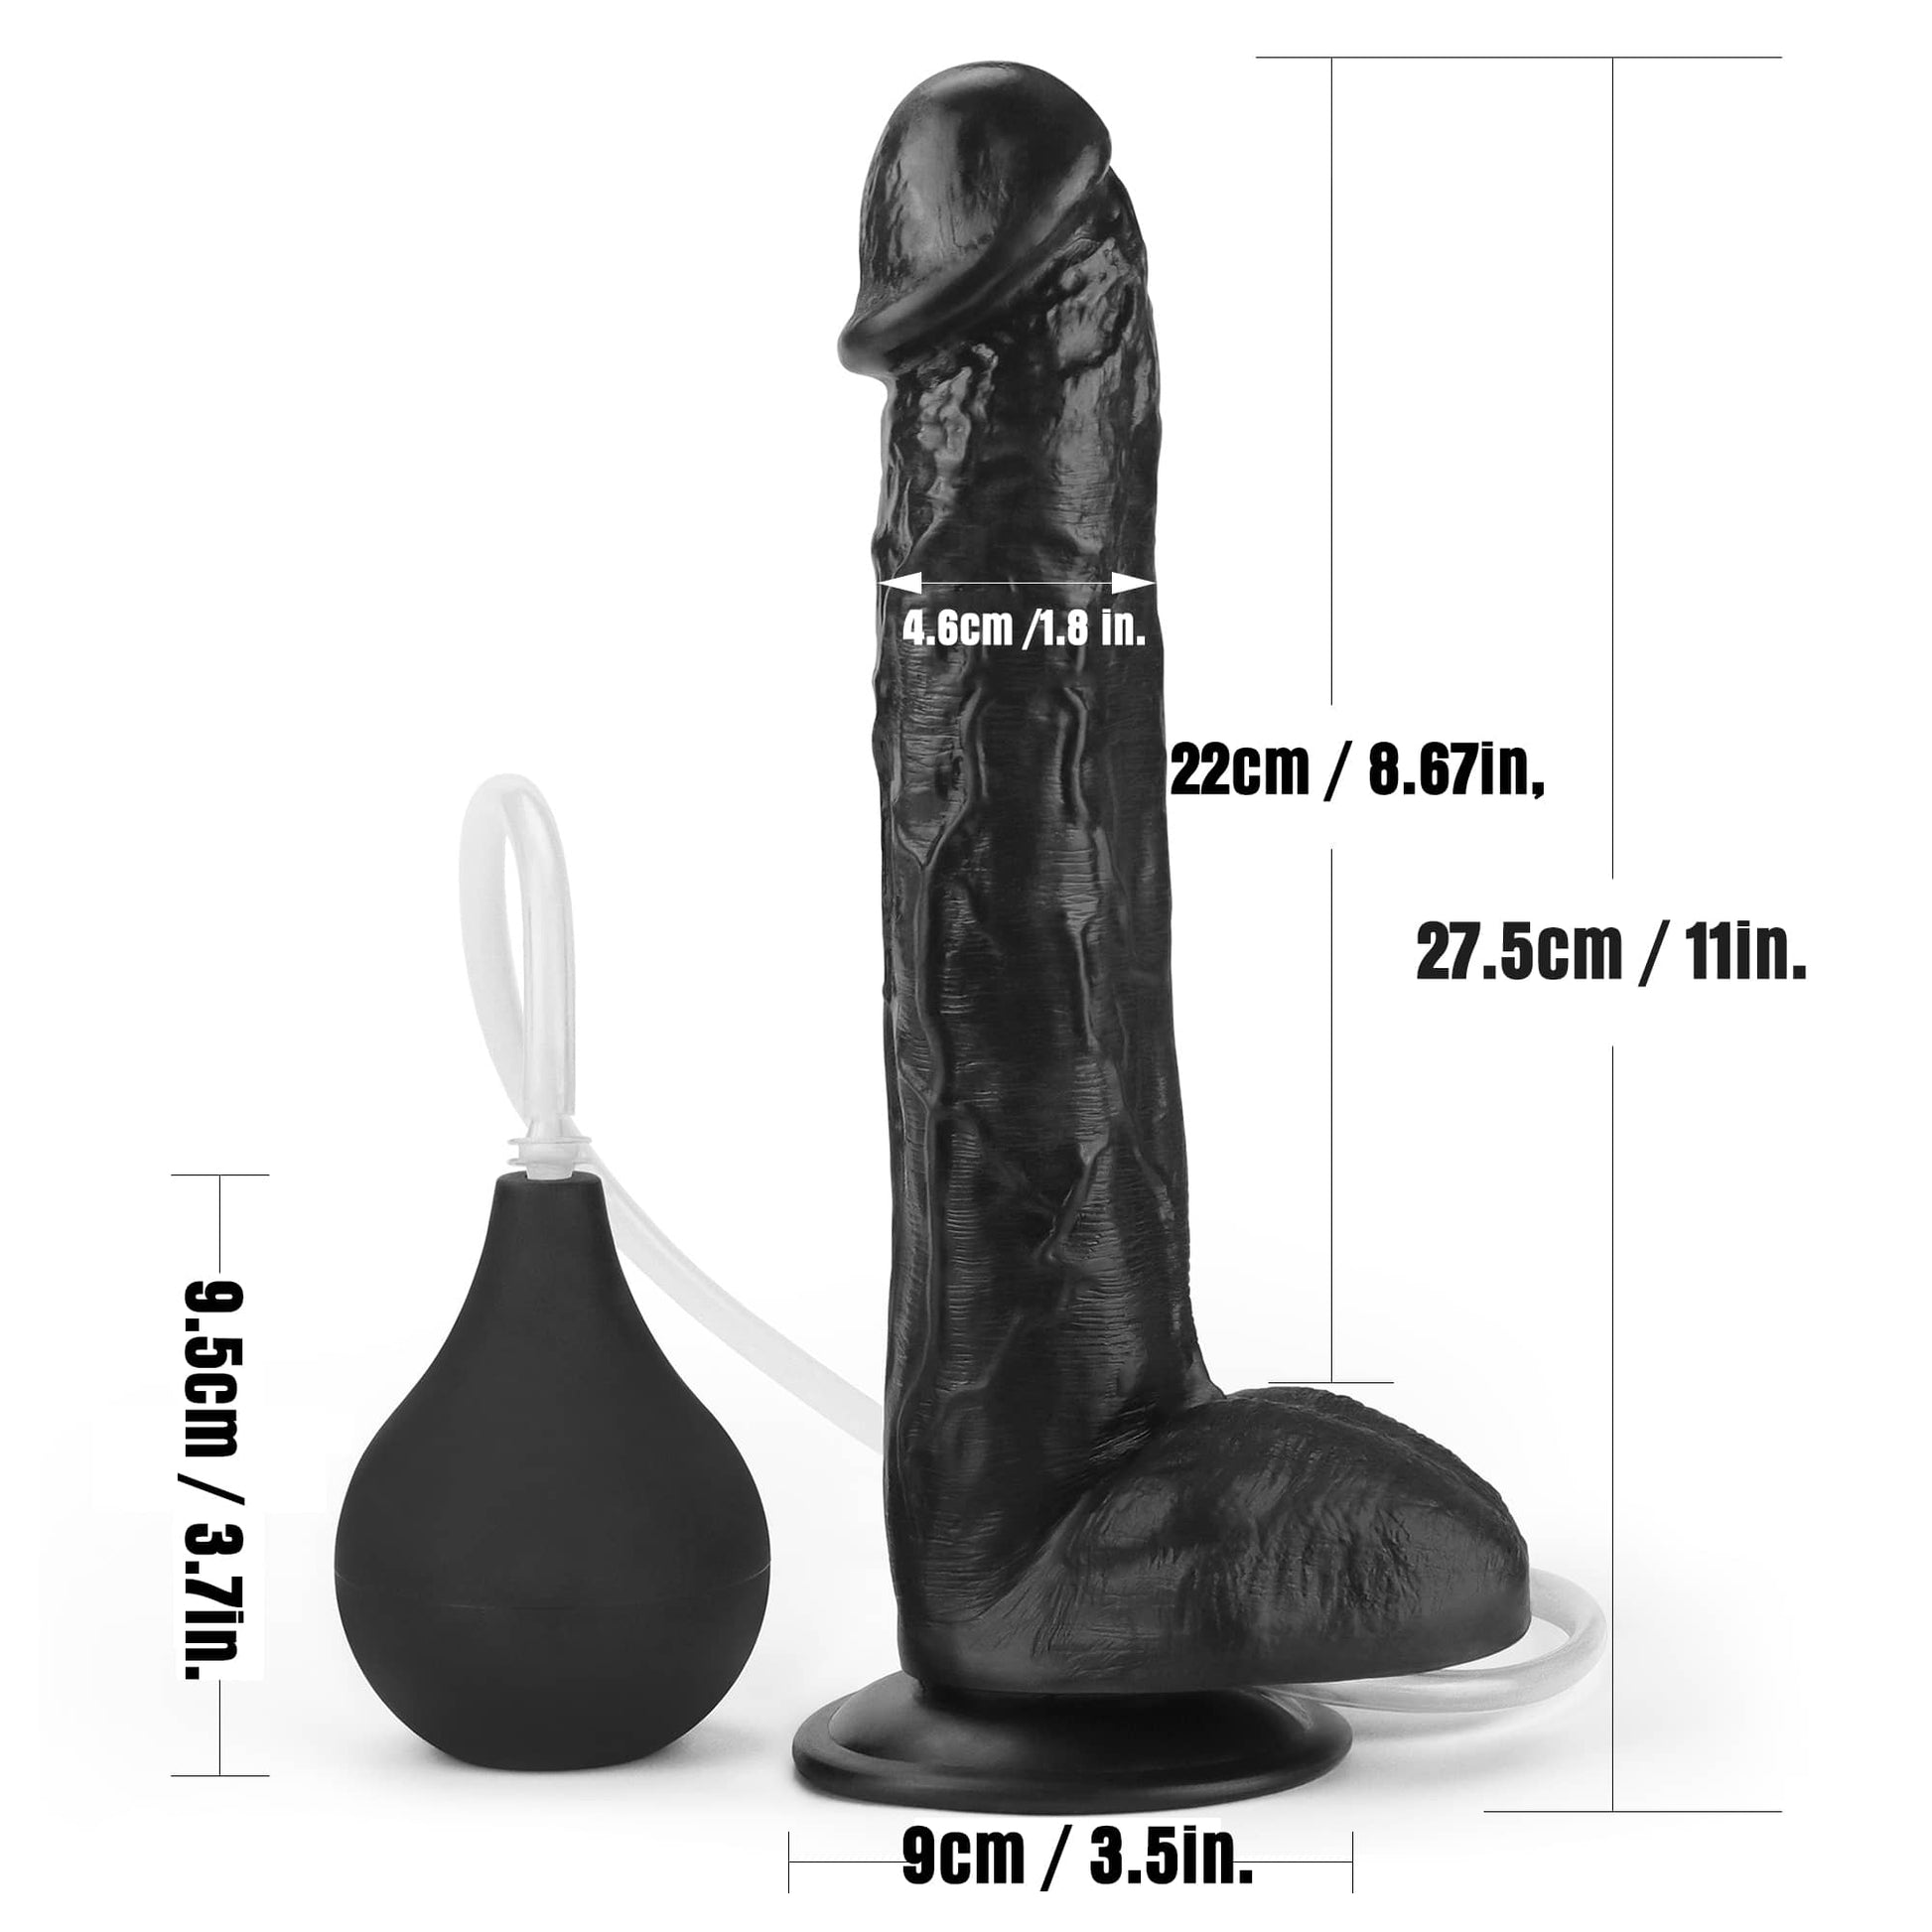 The size of the 11 inches black realistic ejaculating dildo